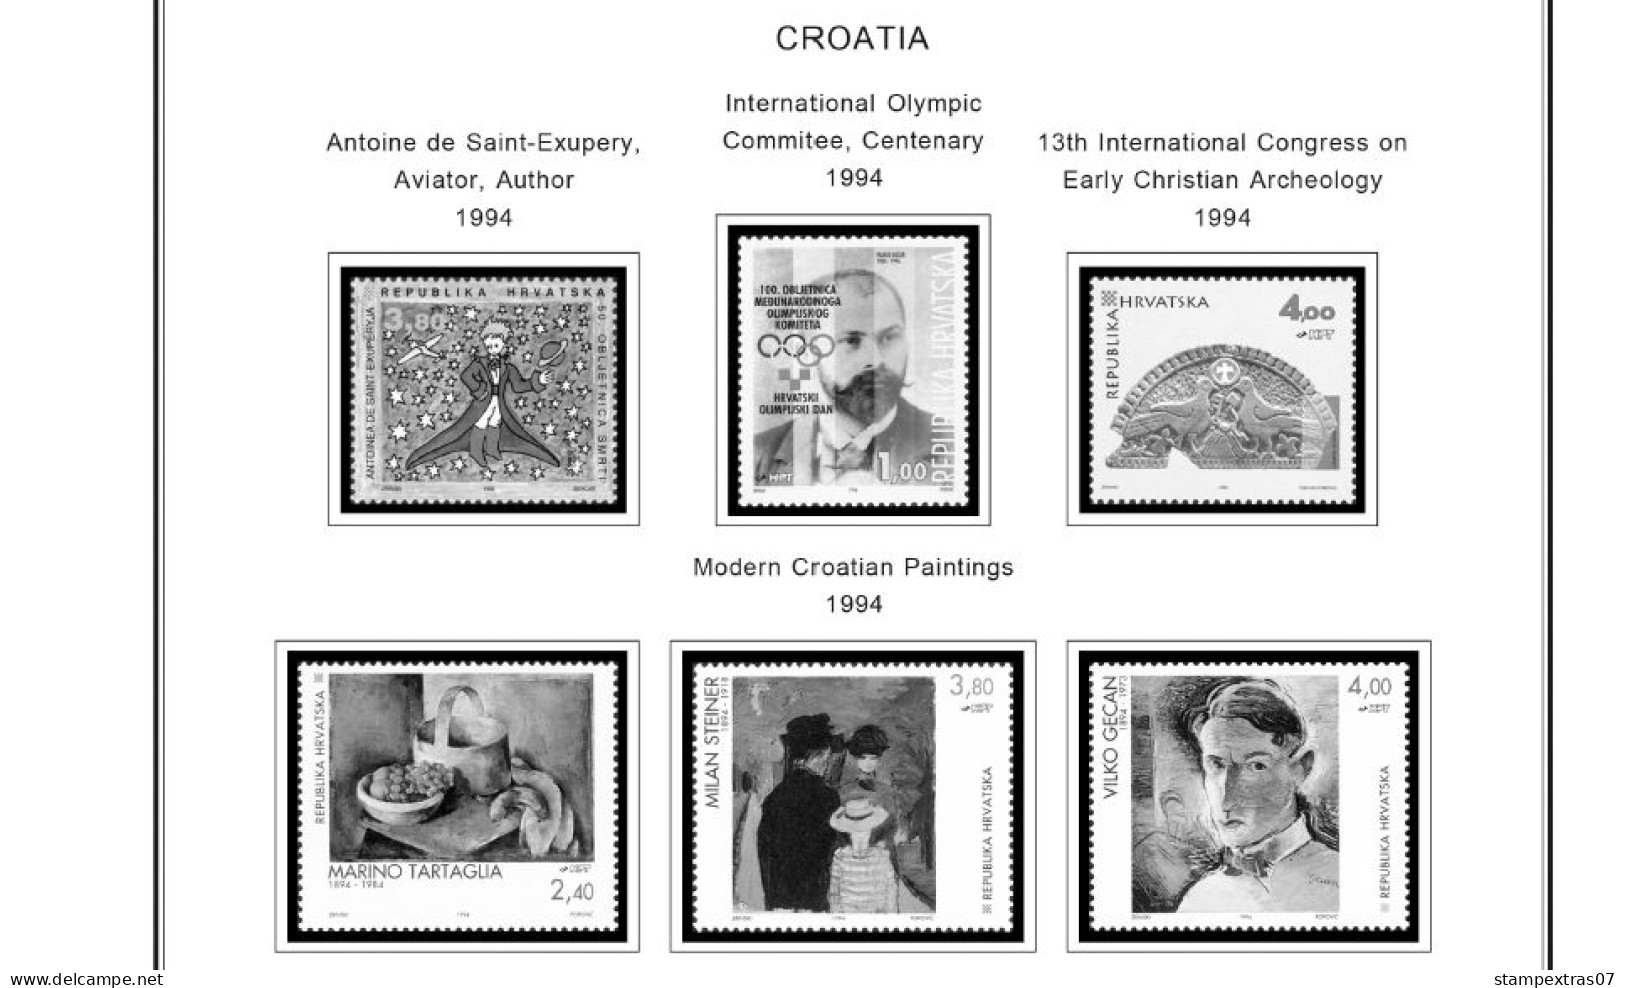 CROATIA 1991-2010 + 2011-2020 STAMP ALBUM PAGES (181 b&w illustrated pages)